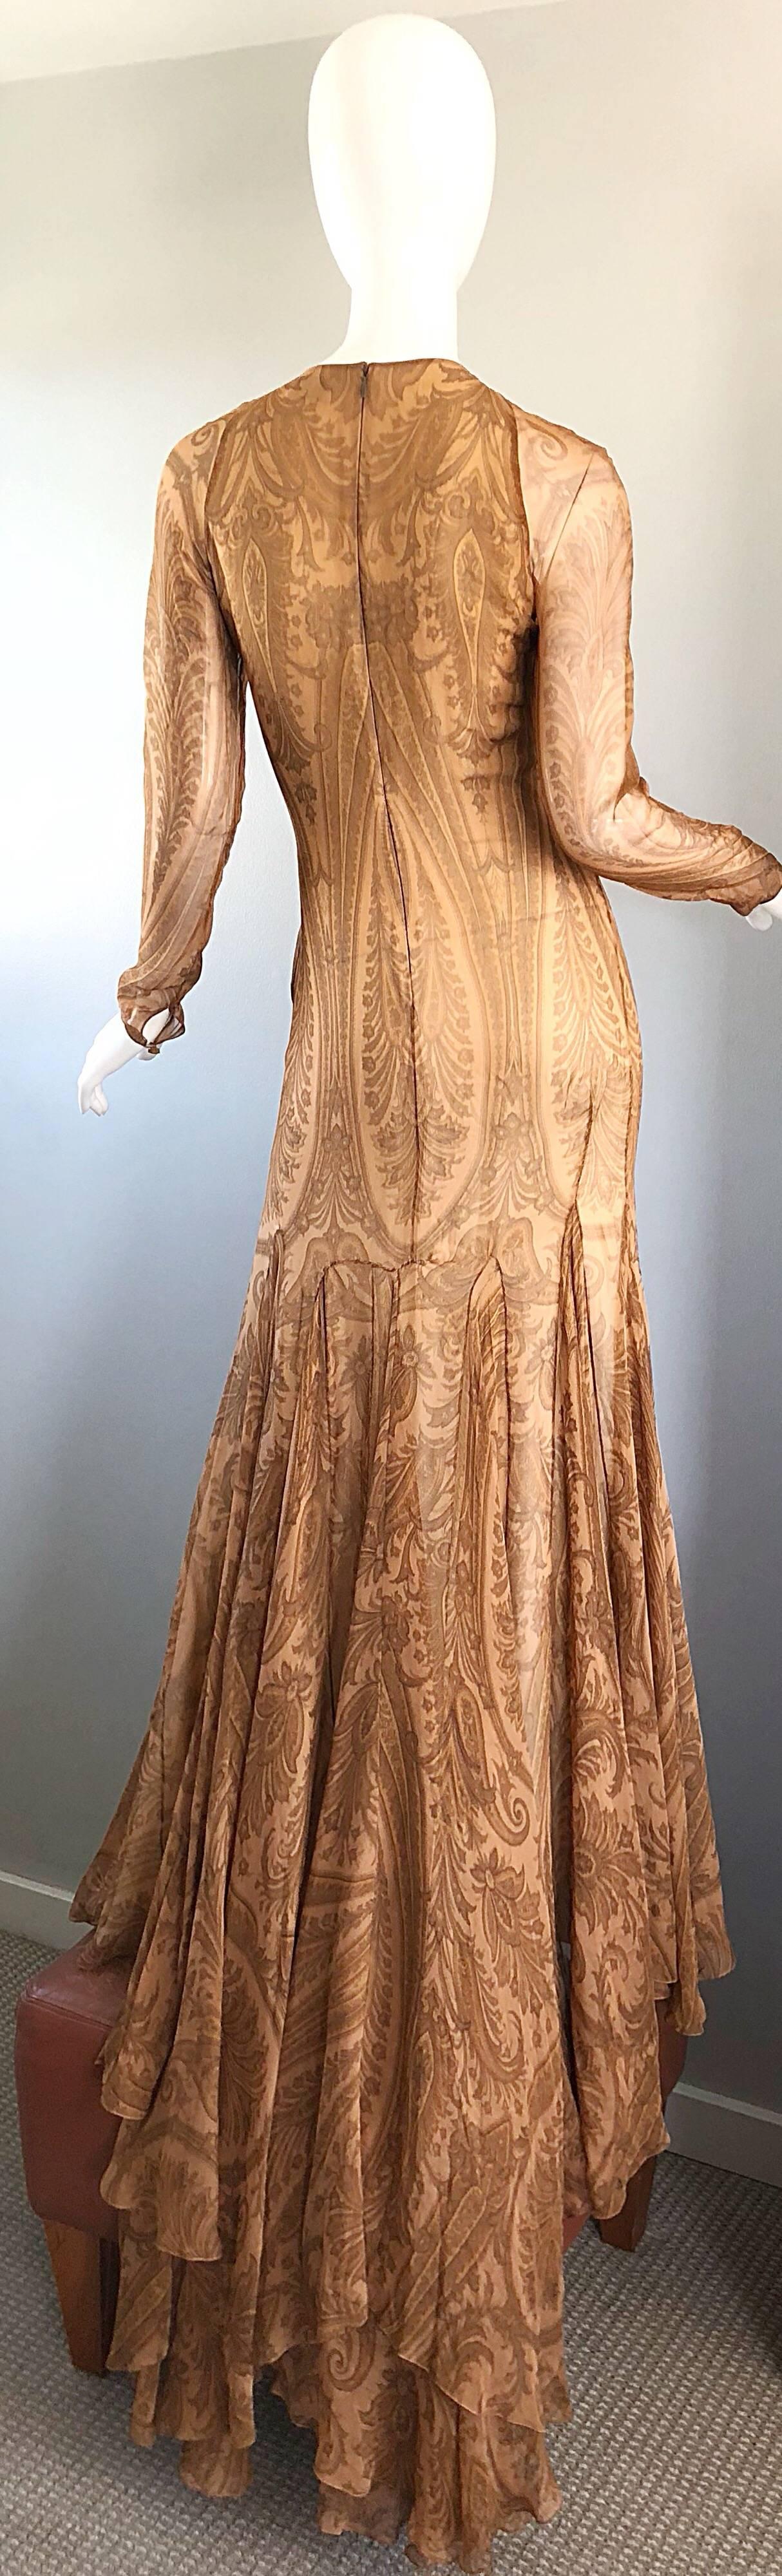 Sensational 1990s Bill Blass Couture Nude Silk Chiffon Paisley Vintage 90s Gown  For Sale 7